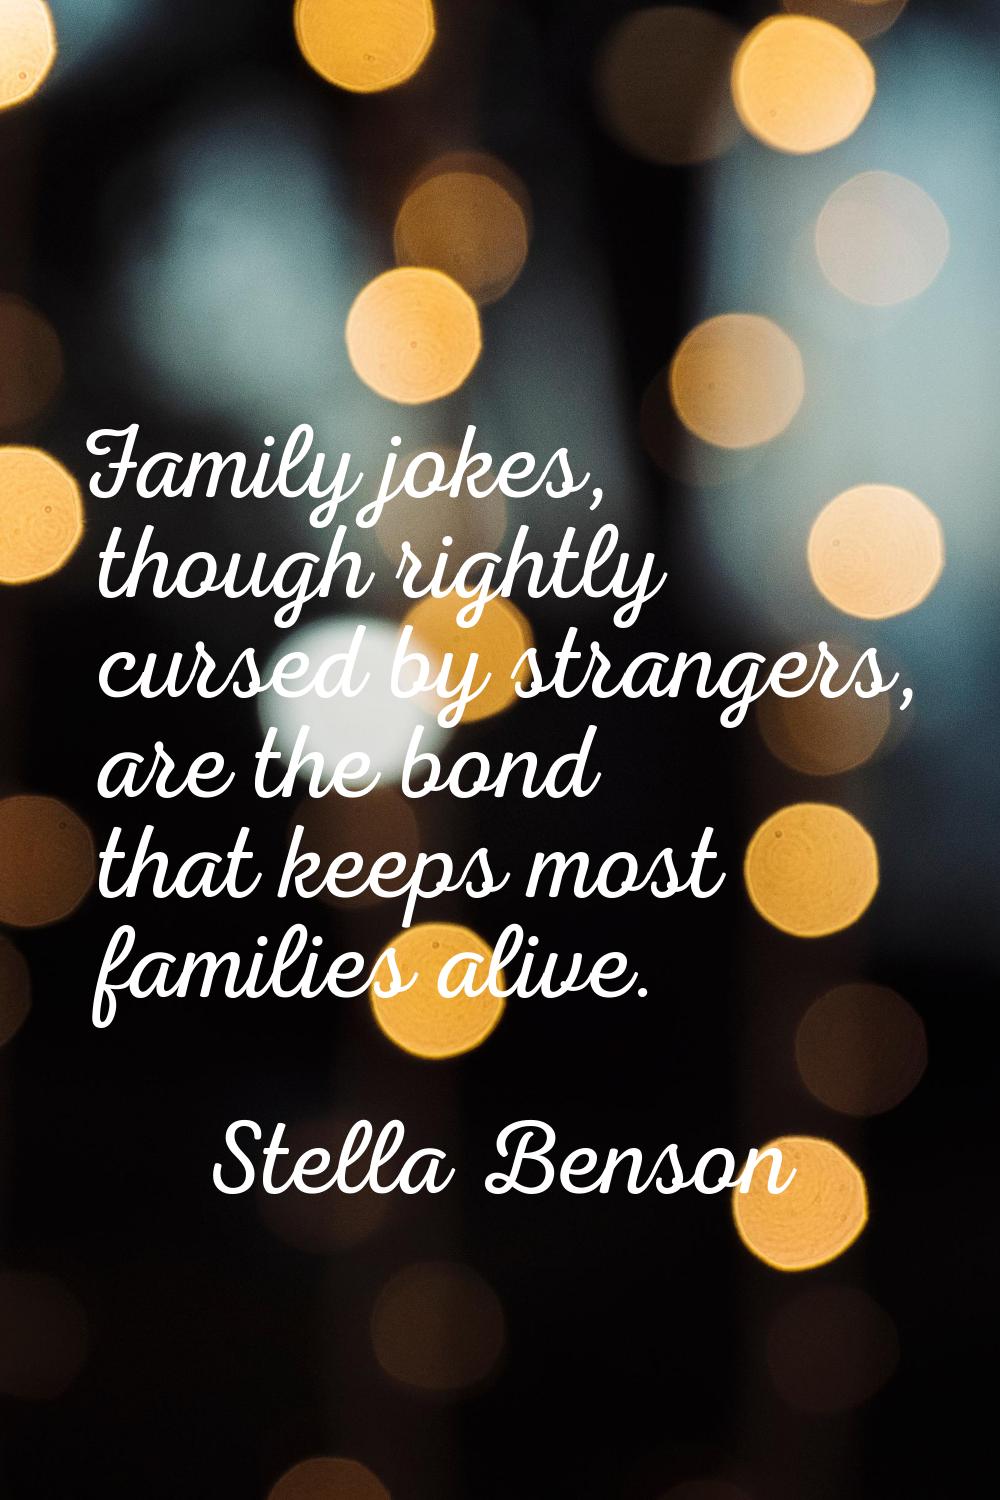 Family jokes, though rightly cursed by strangers, are the bond that keeps most families alive.